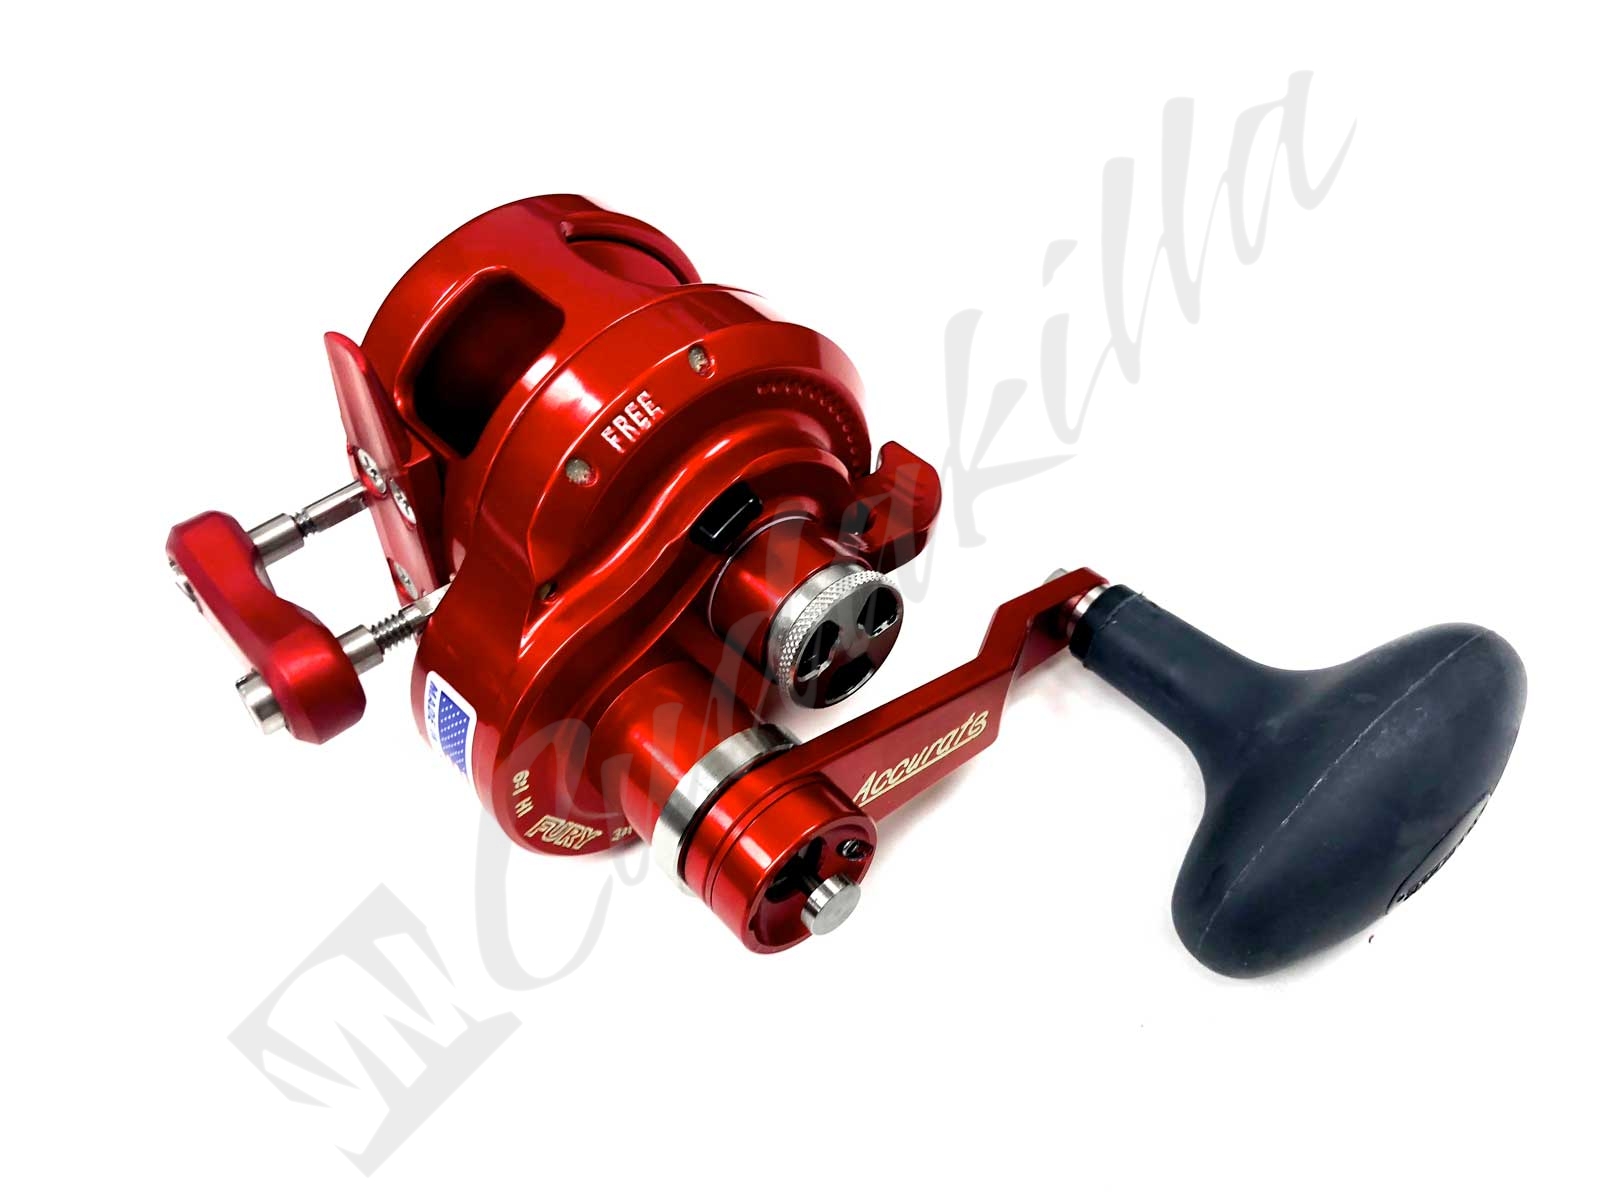 Accurate Boss Fury Conventional Reel - Red